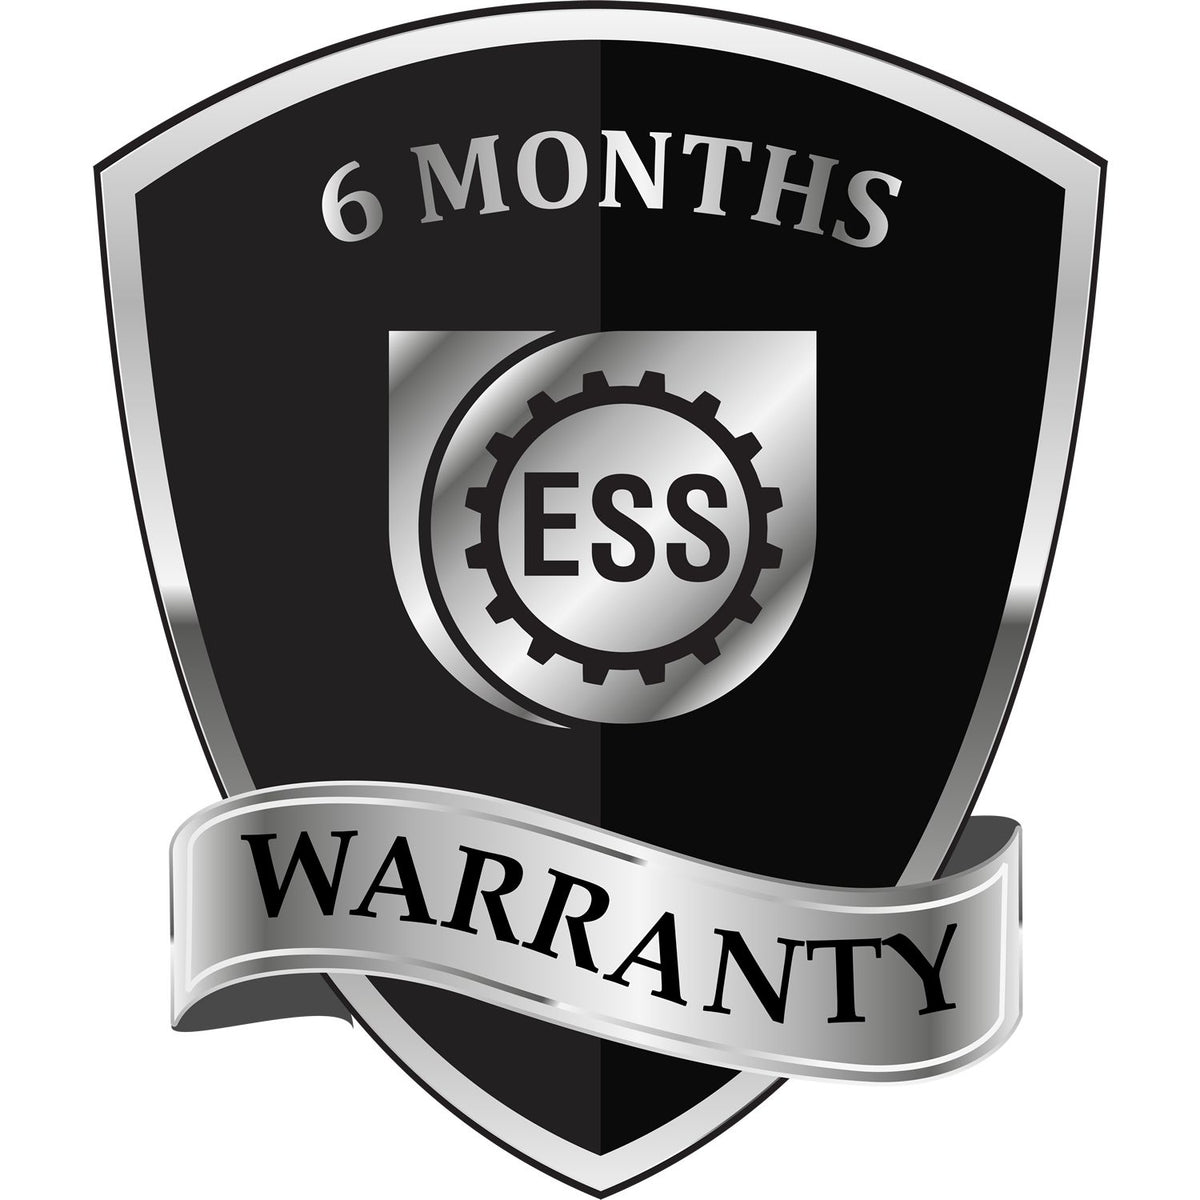 A badge or emblem showing a warranty icon for the Virginia Professional Engineer Seal Stamp